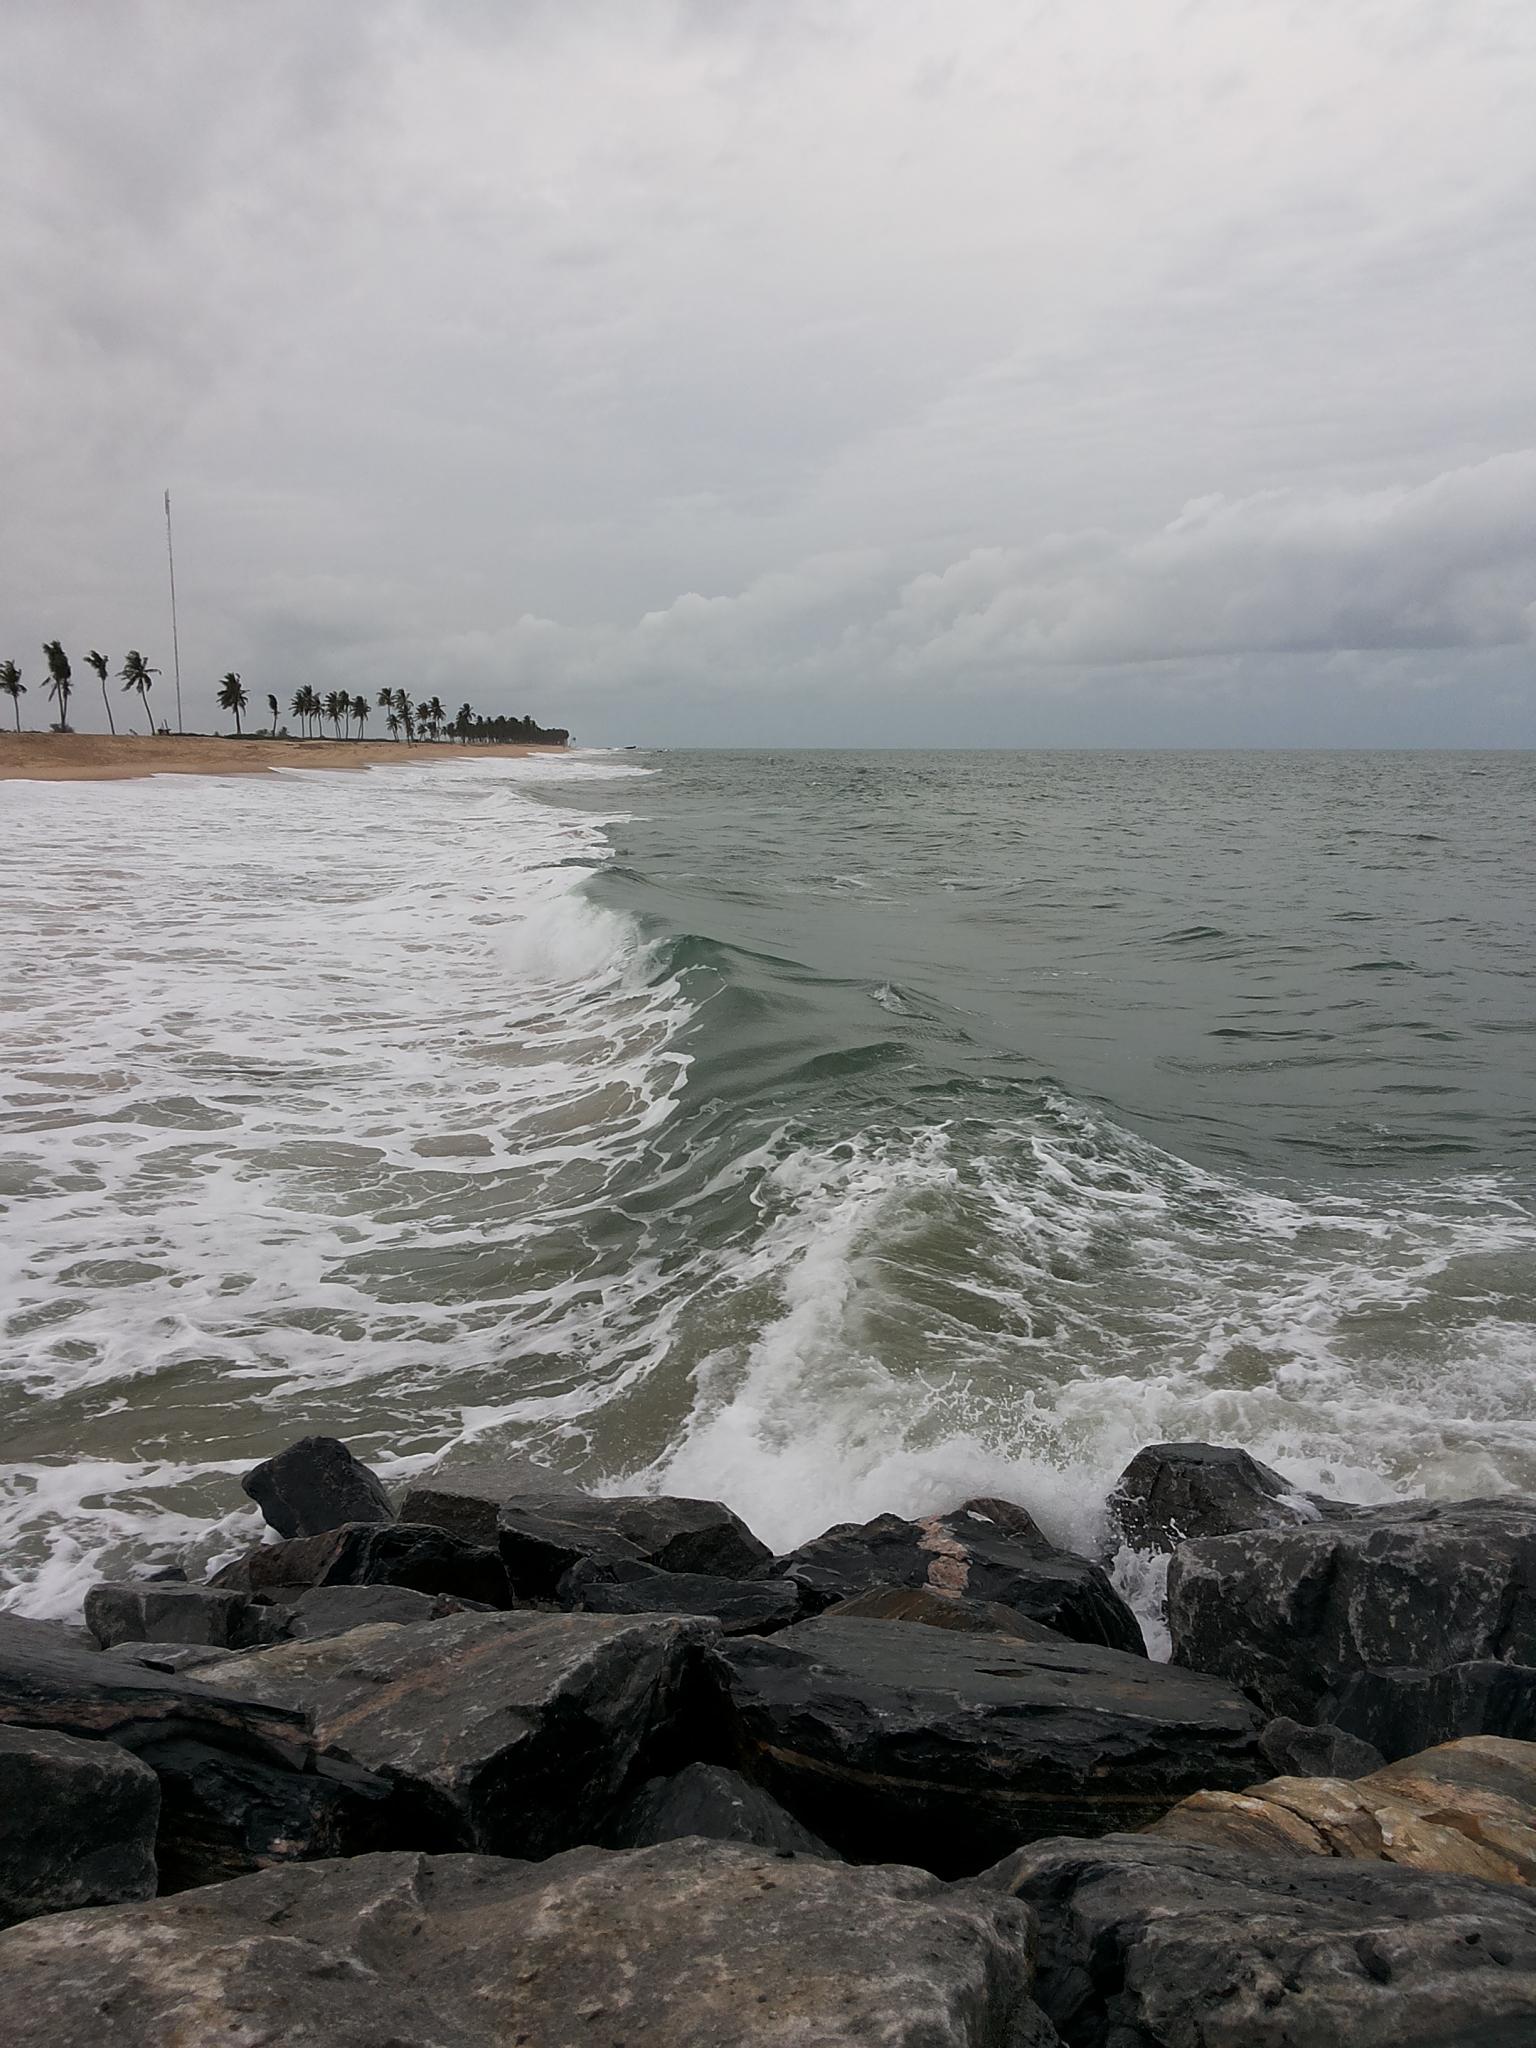 Cover image of this place Elegushi Beach